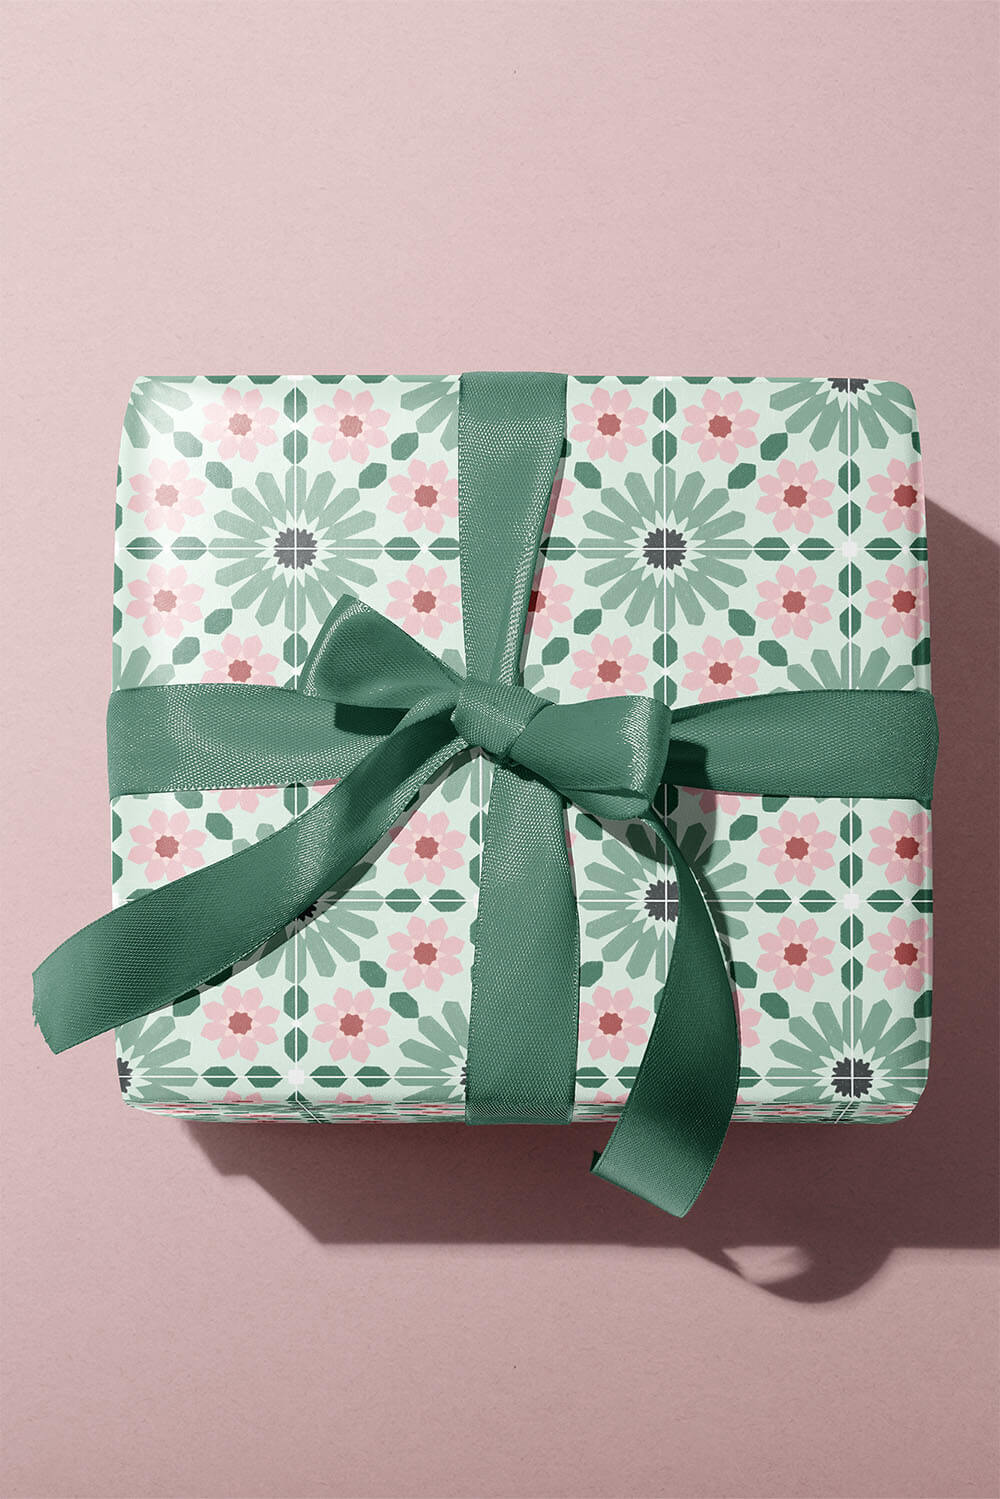 creative gift wrap ideas and eco friendly christmas decor - moroccan inspired green and pink wrapping paper